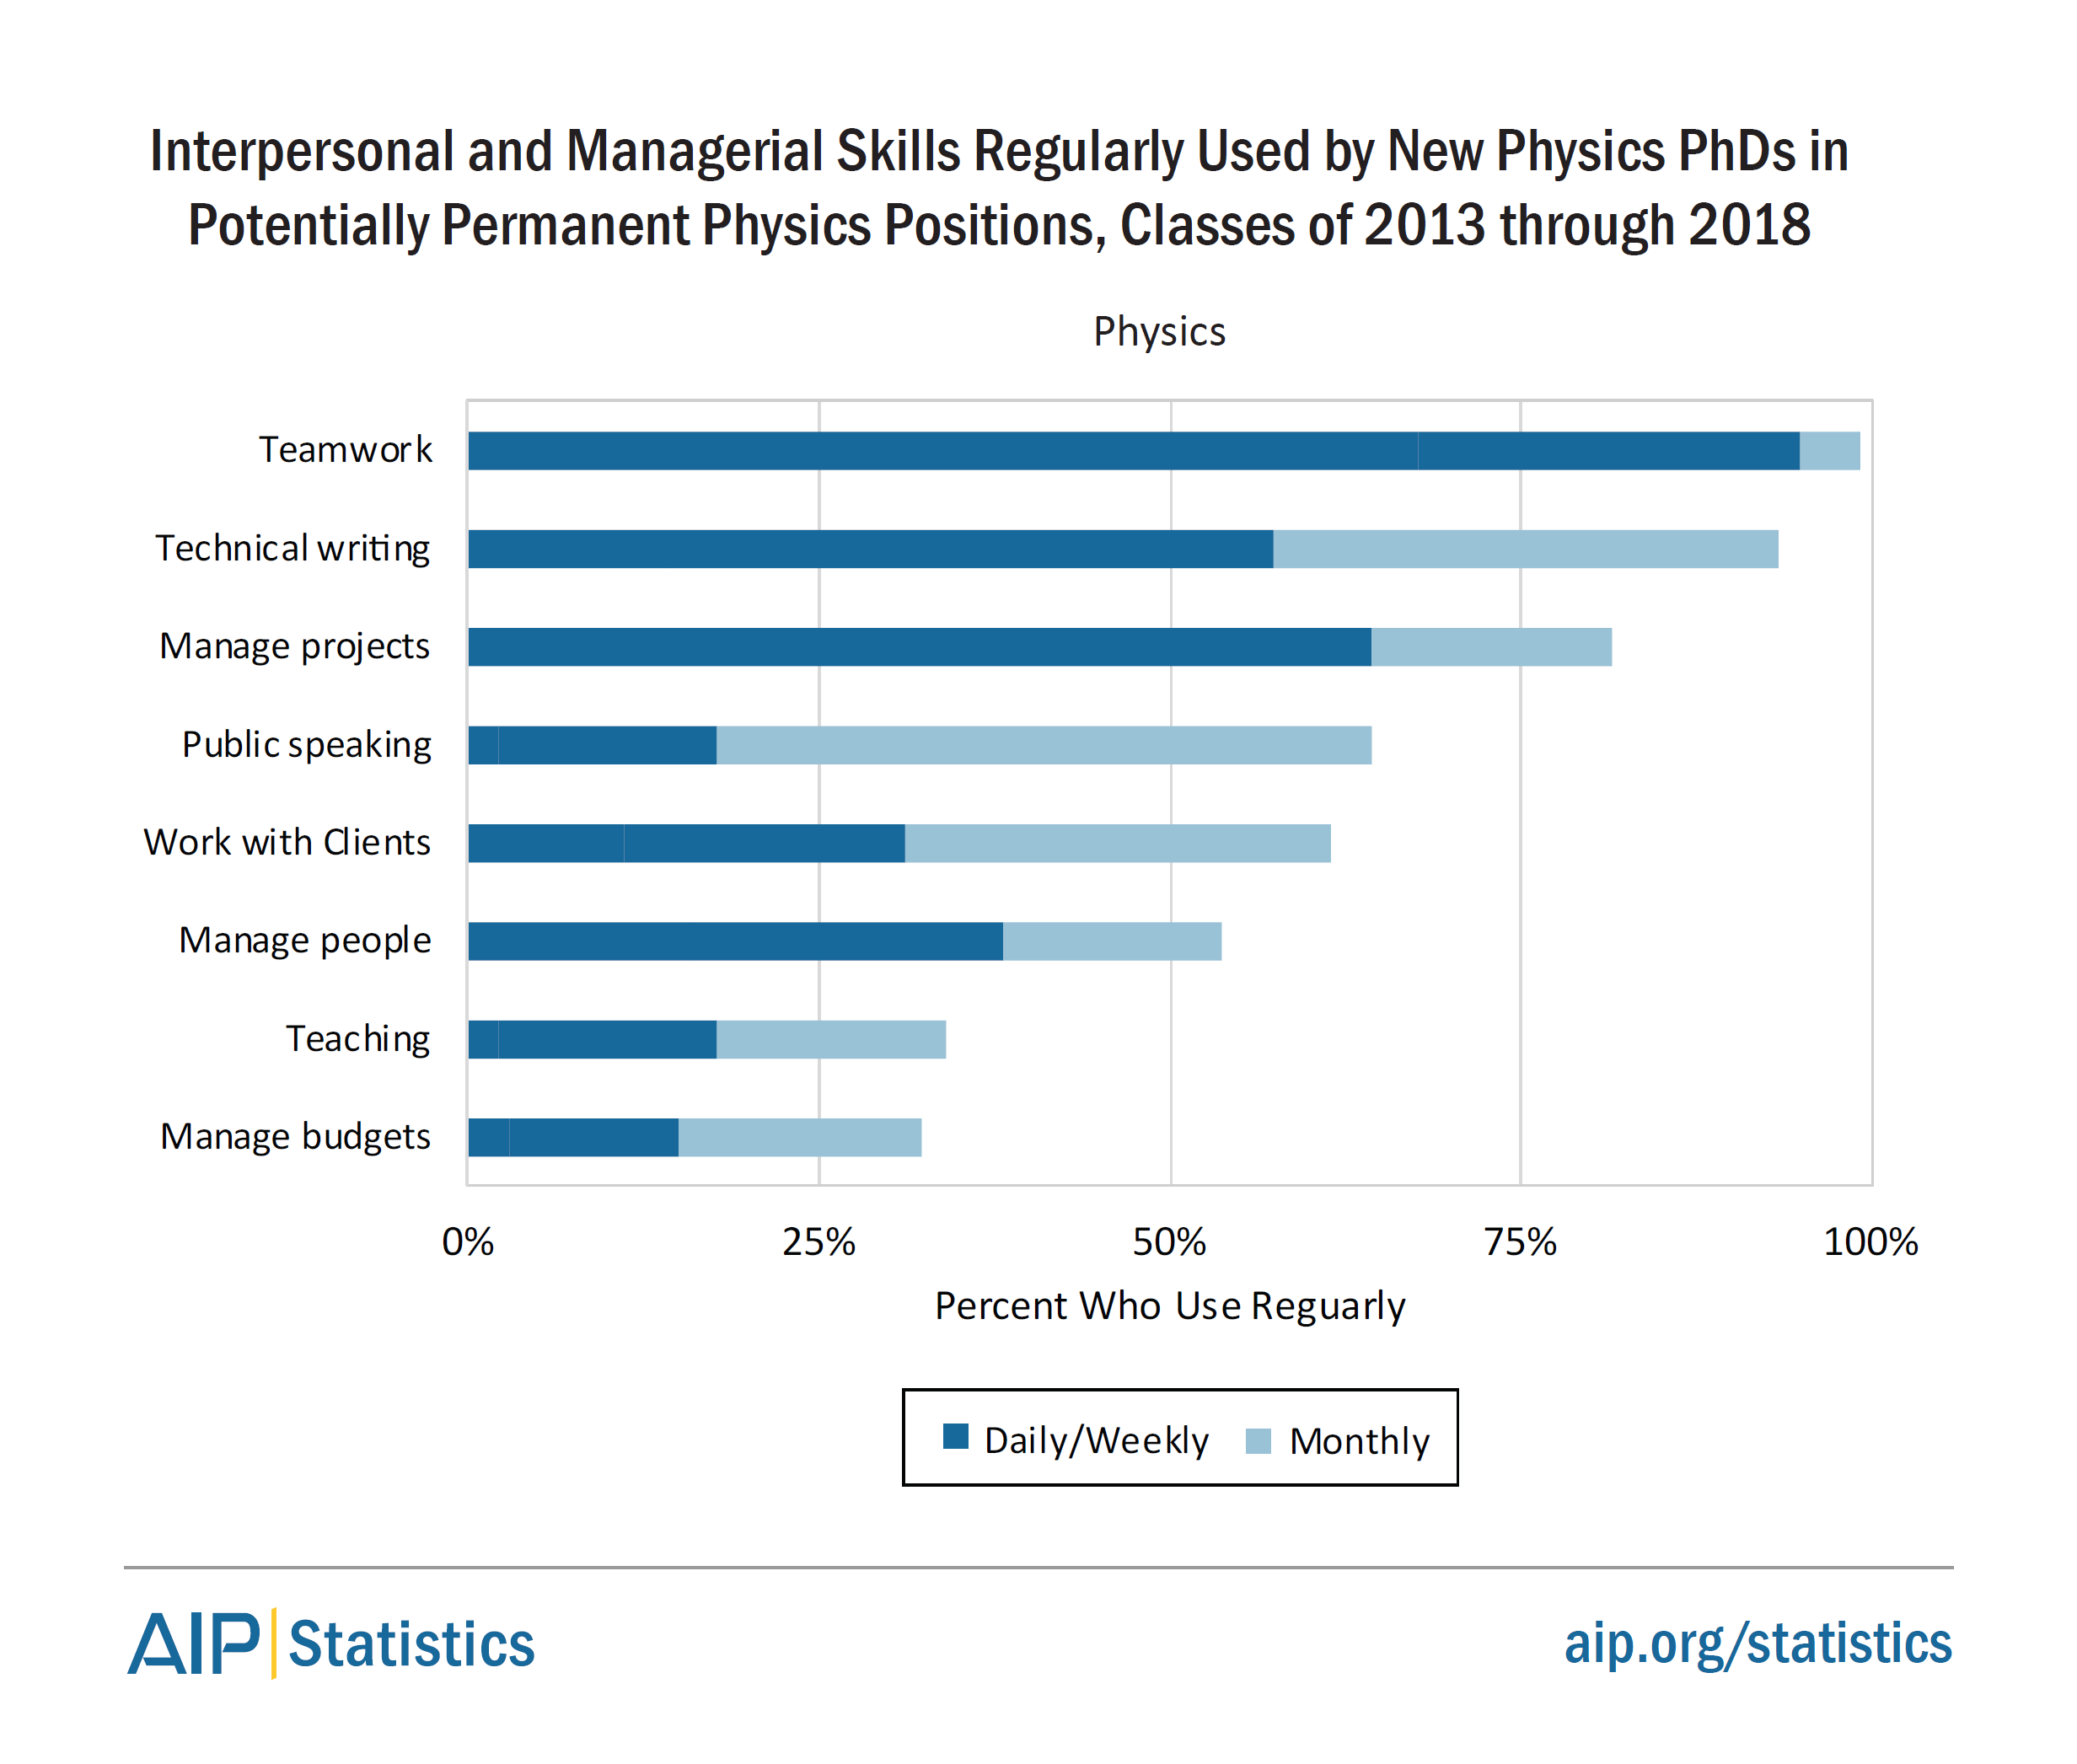 Interpersonal and Managerial Skills Used by Physics PhDs in Physics Positions